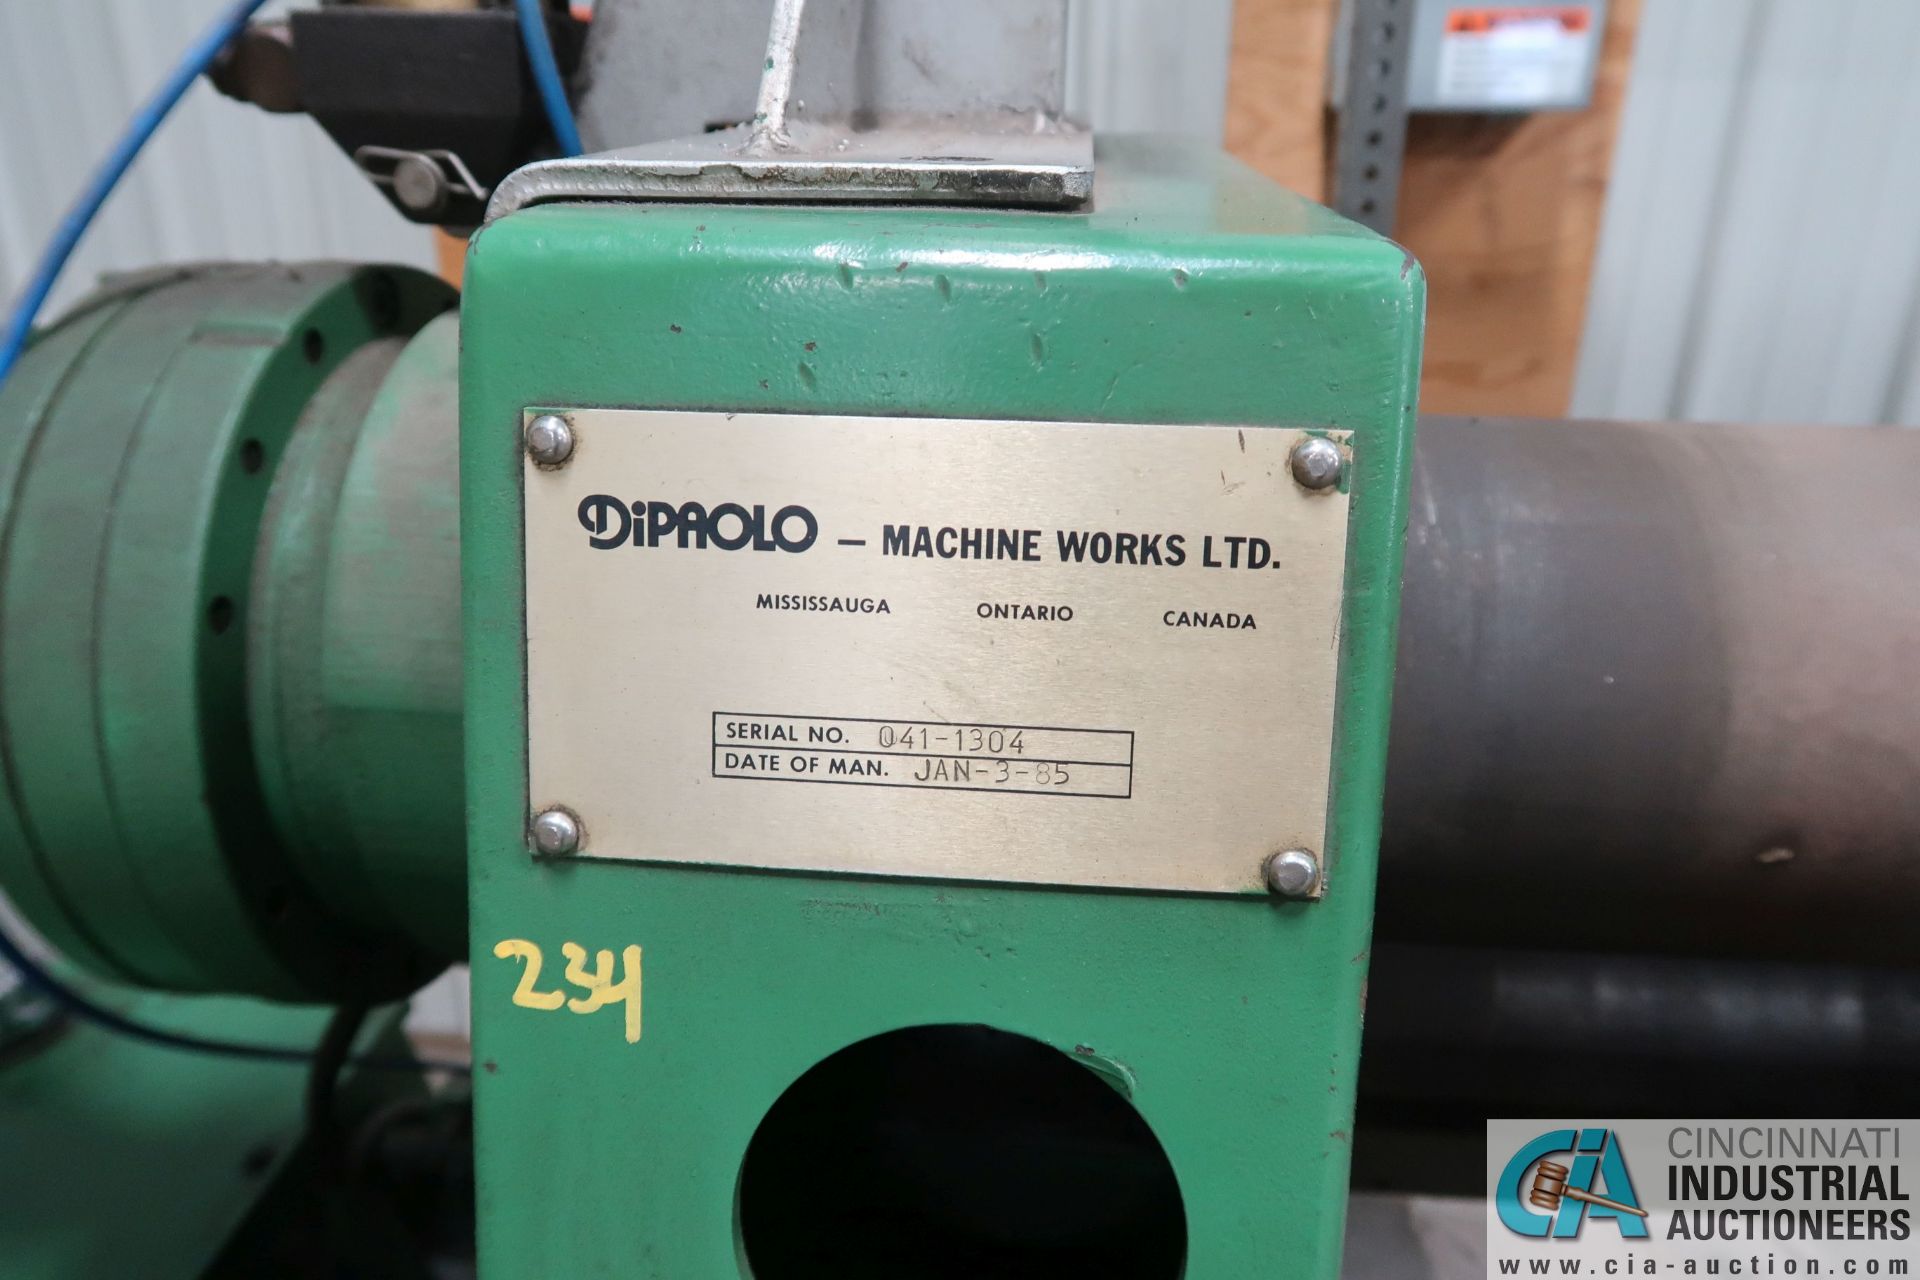 1/4" X 3' DIPAOLO PYRAMID STYLE PLATE BENDING MACHINE; S/N 041-1304, 7-1/2 HP, 6-1/2" DIA. ROLLS, - Image 5 of 9